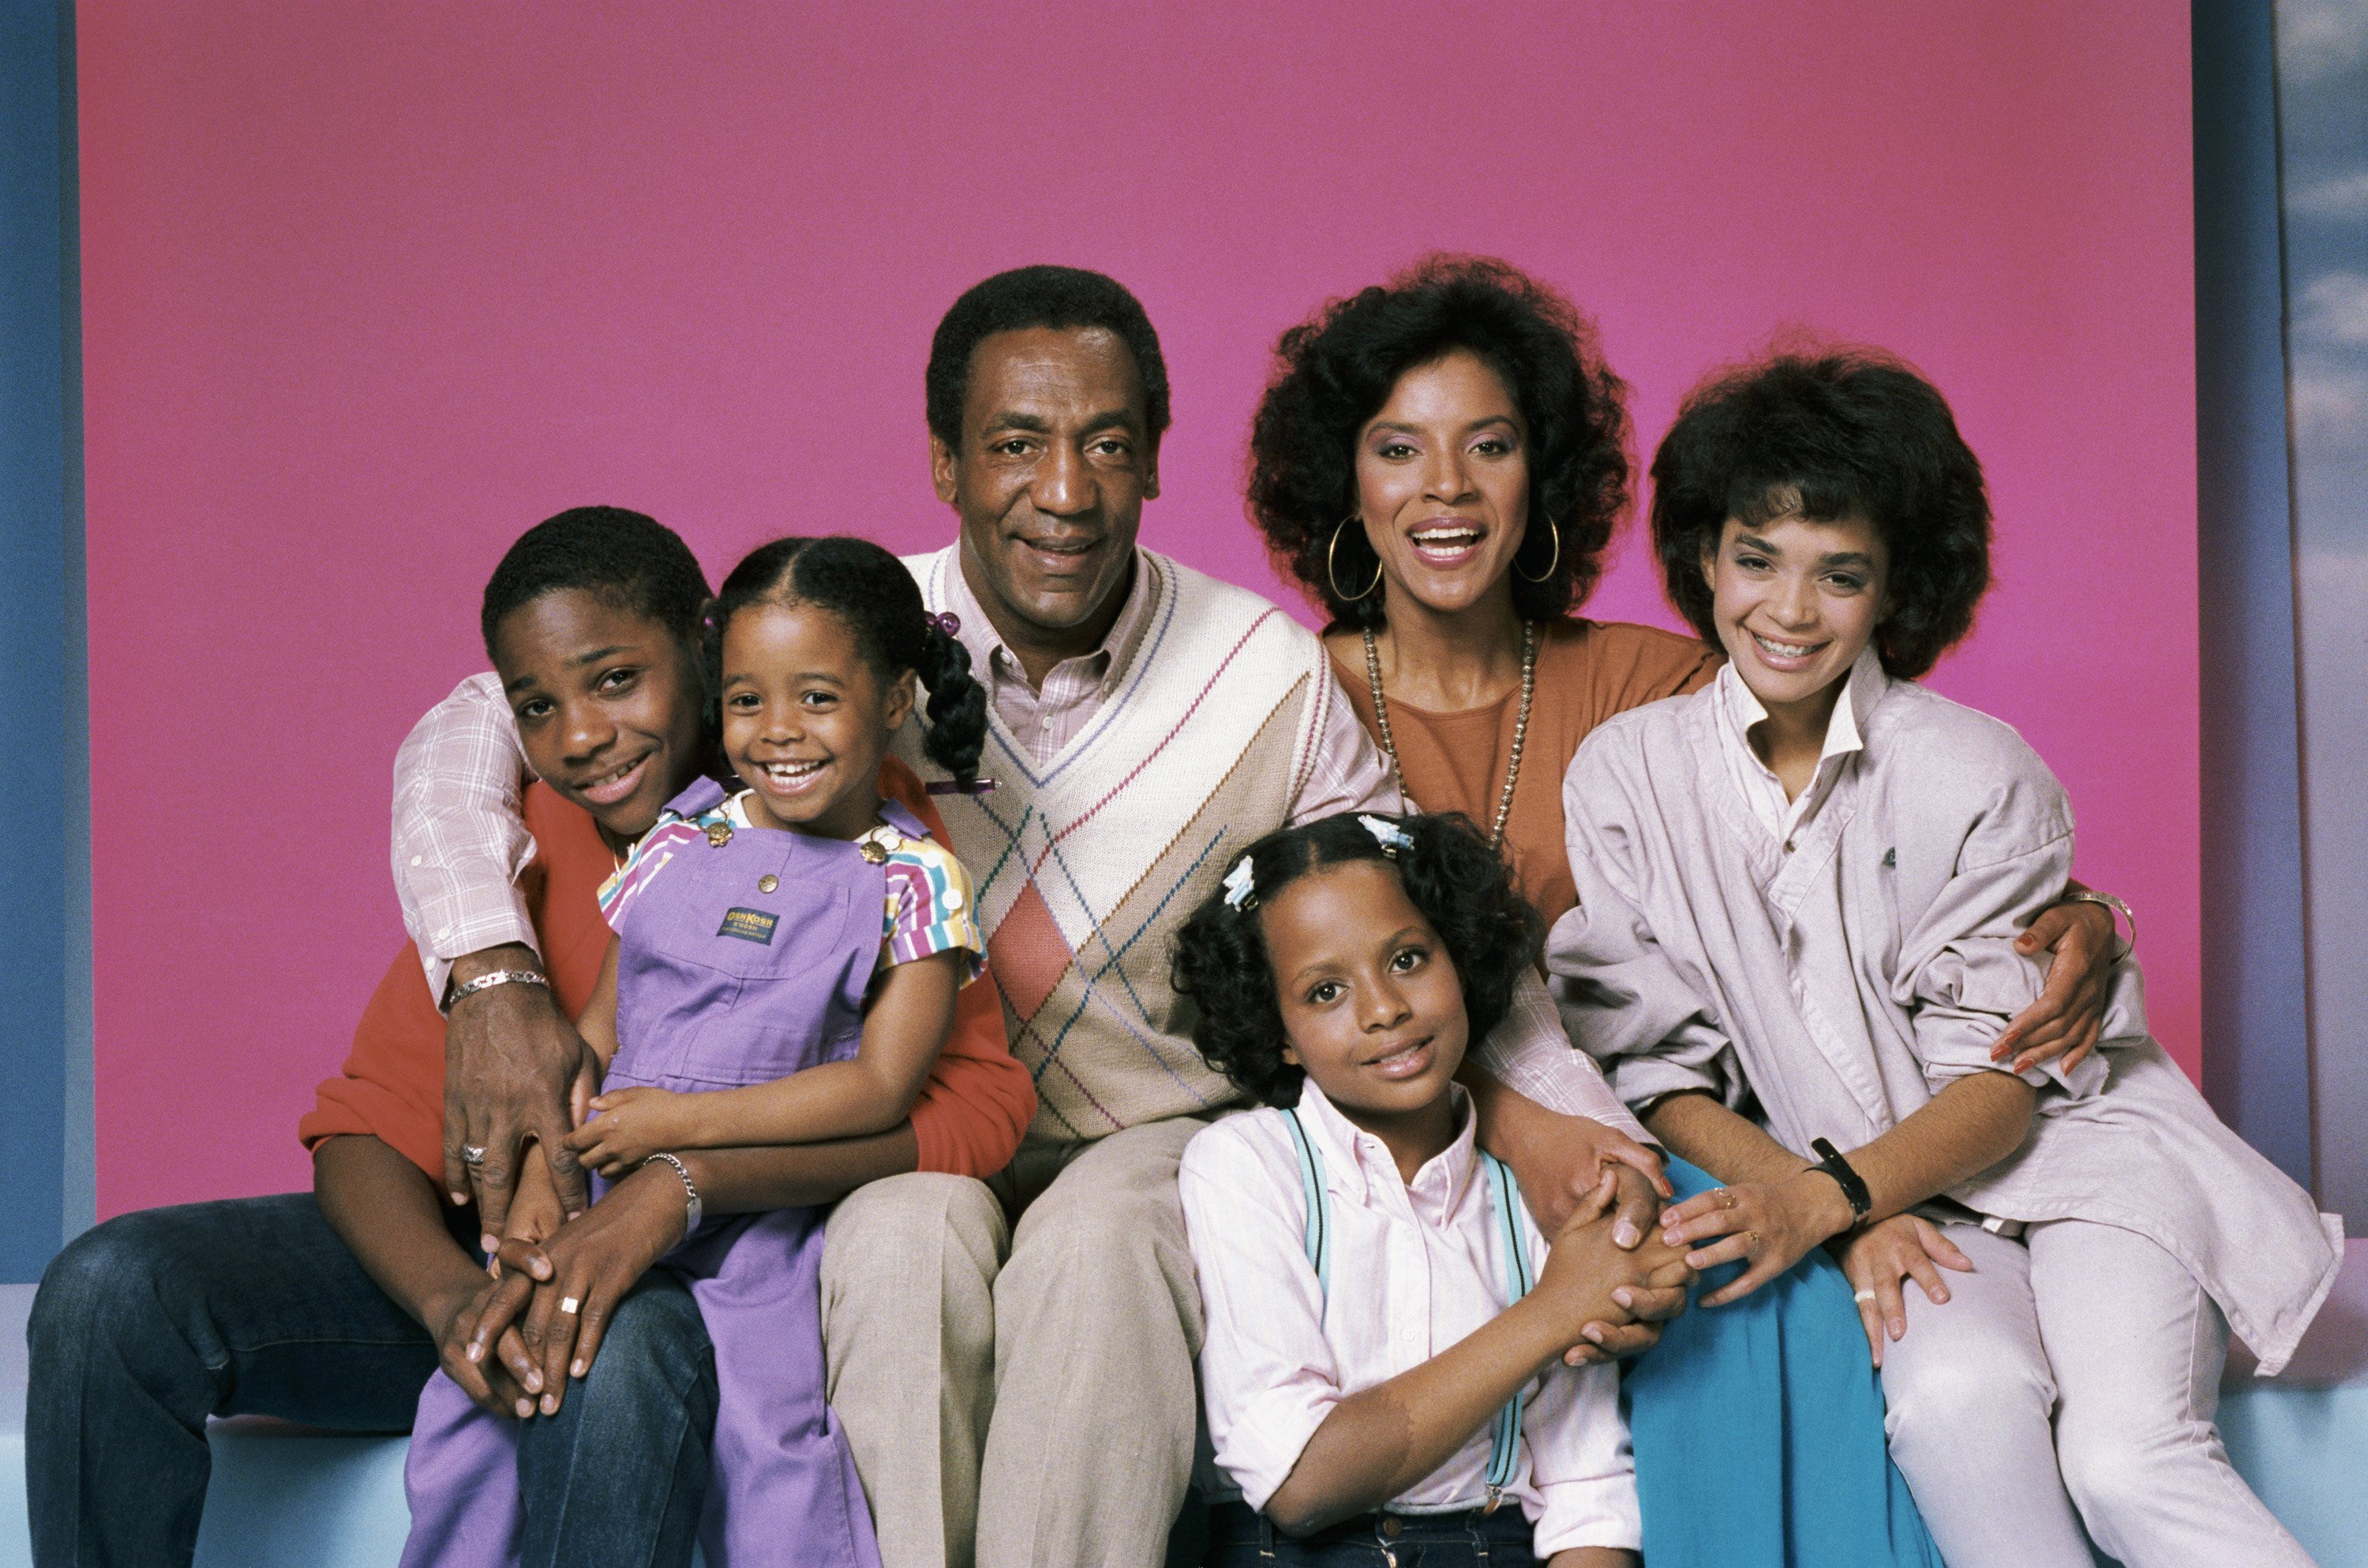 The cast of "The Cosby Show" in a promotional photoshoot for the show's first season in 1984 | Photo: Getty Images